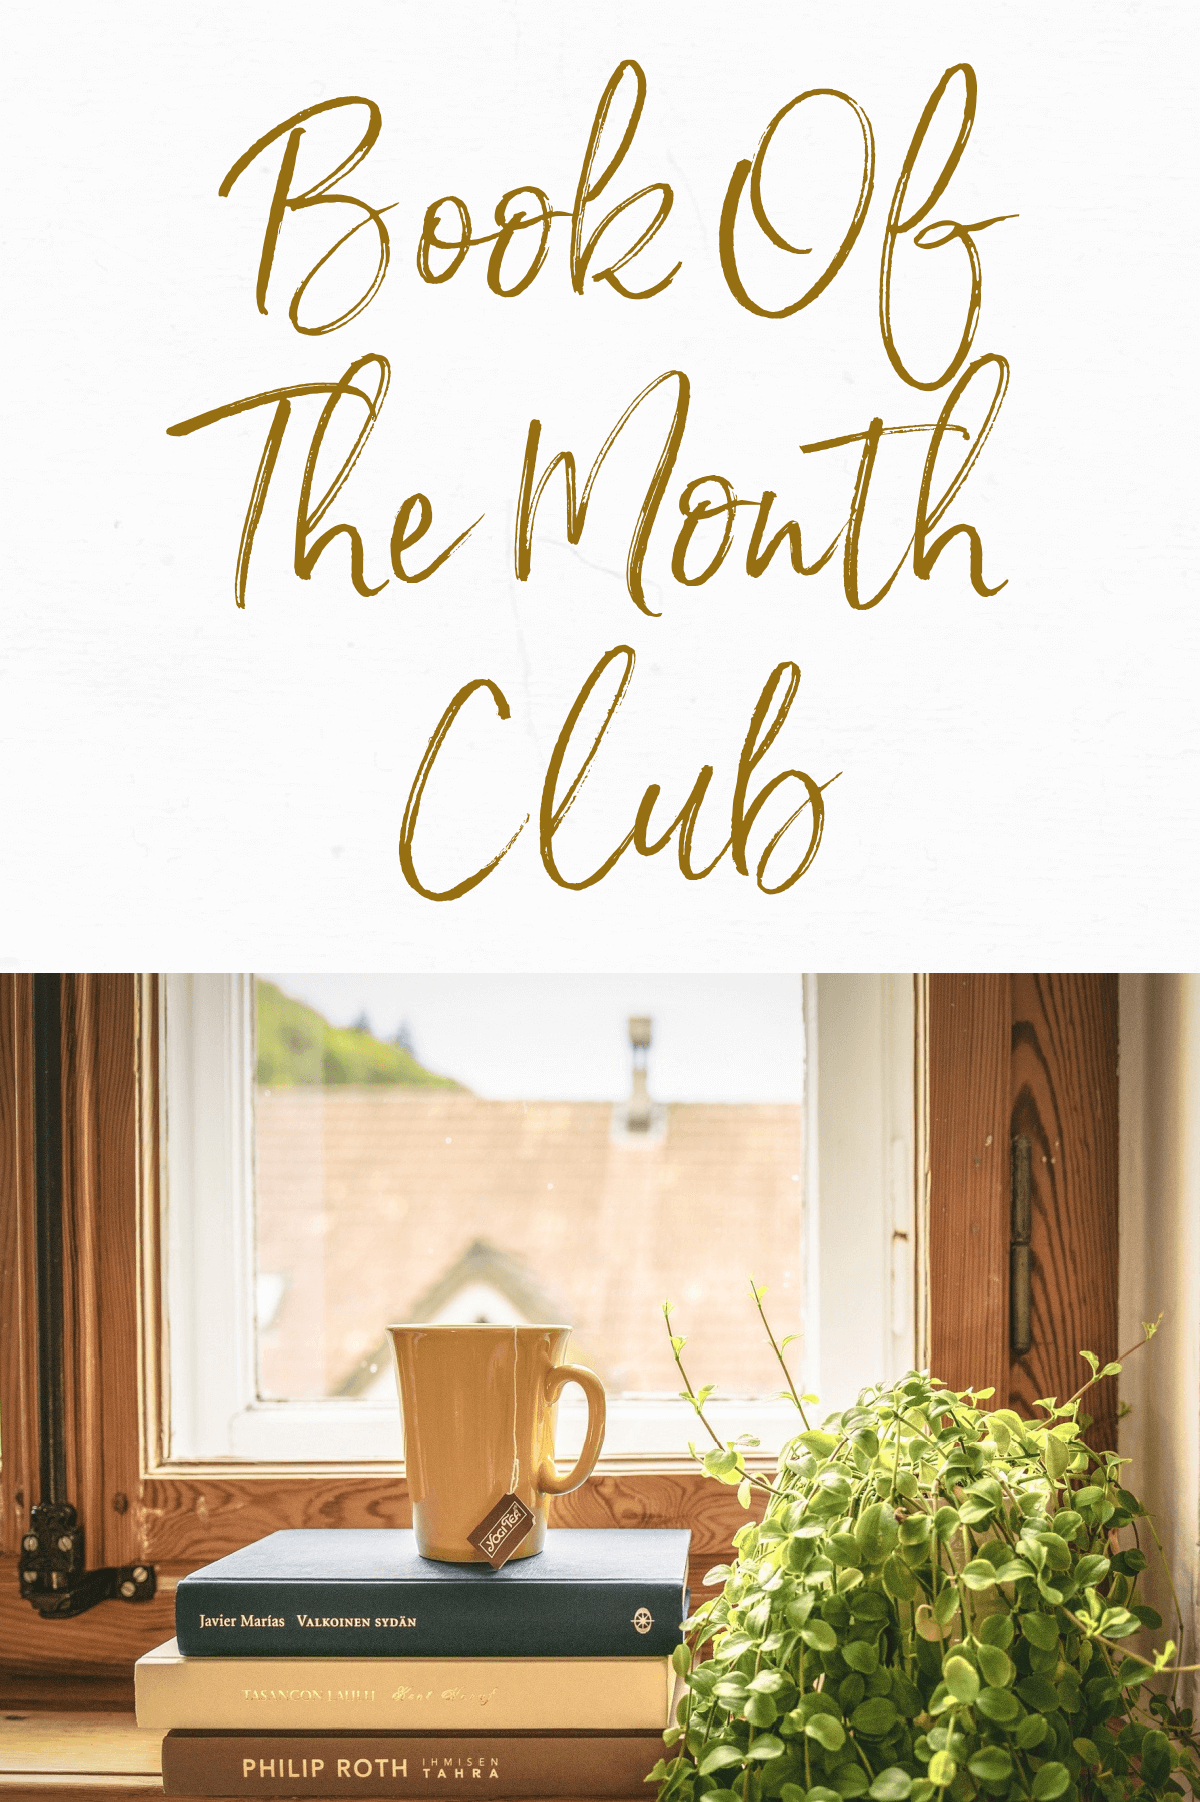 Remember The Book Of The Month Club?